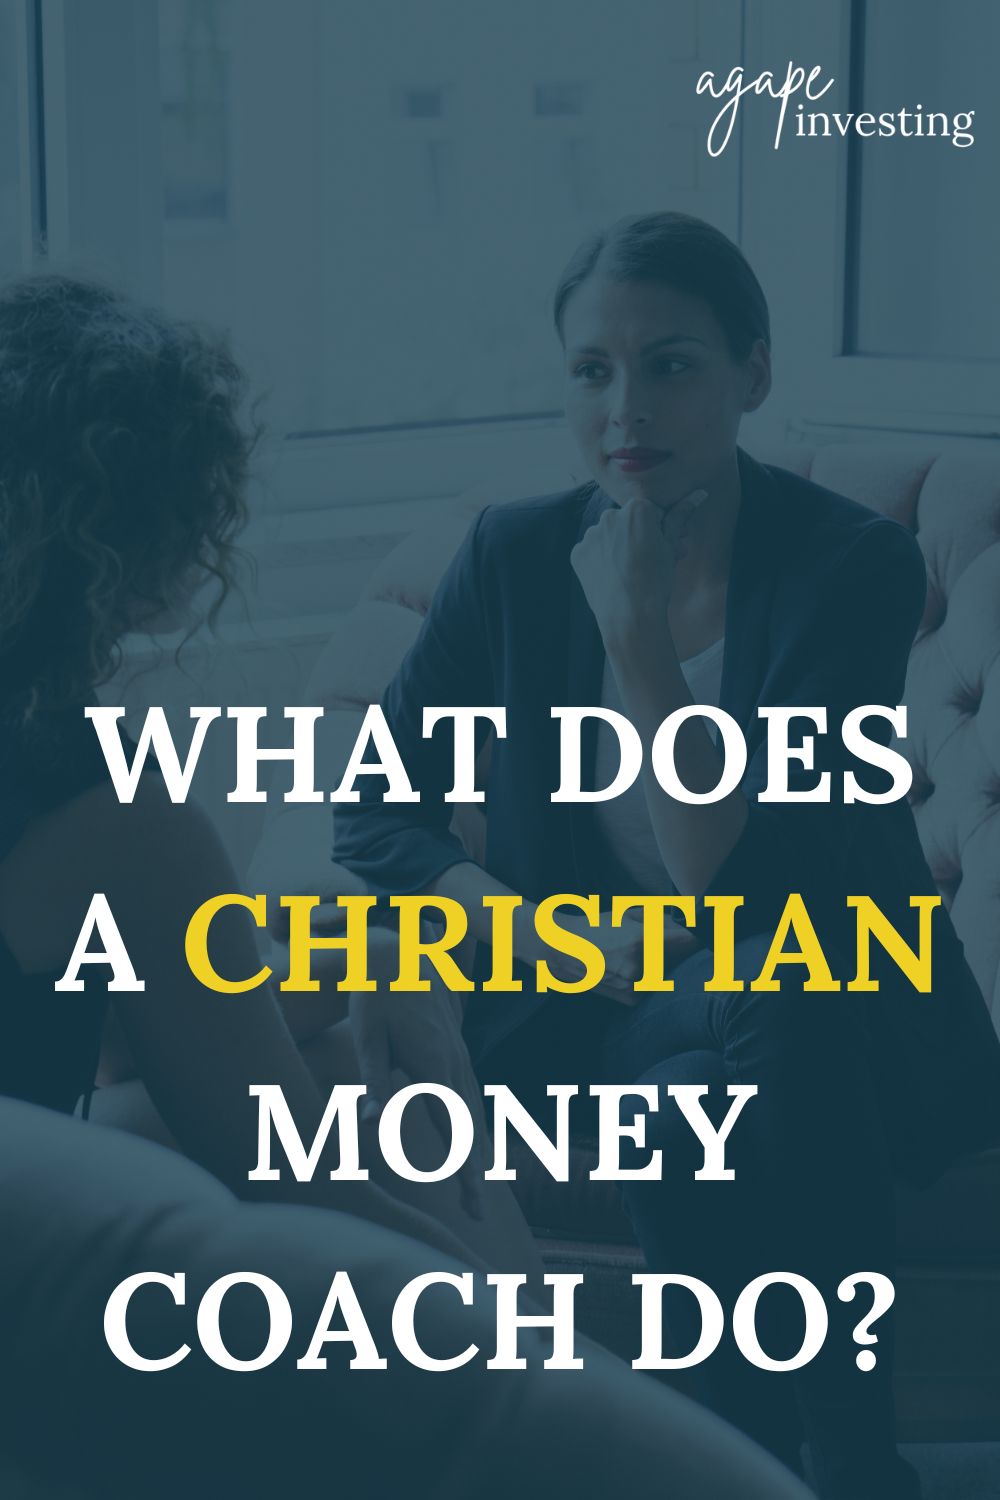 What does a Christian money coach do? At the core of things, a Christian money coach helps others discover and pursue God's design for their money.